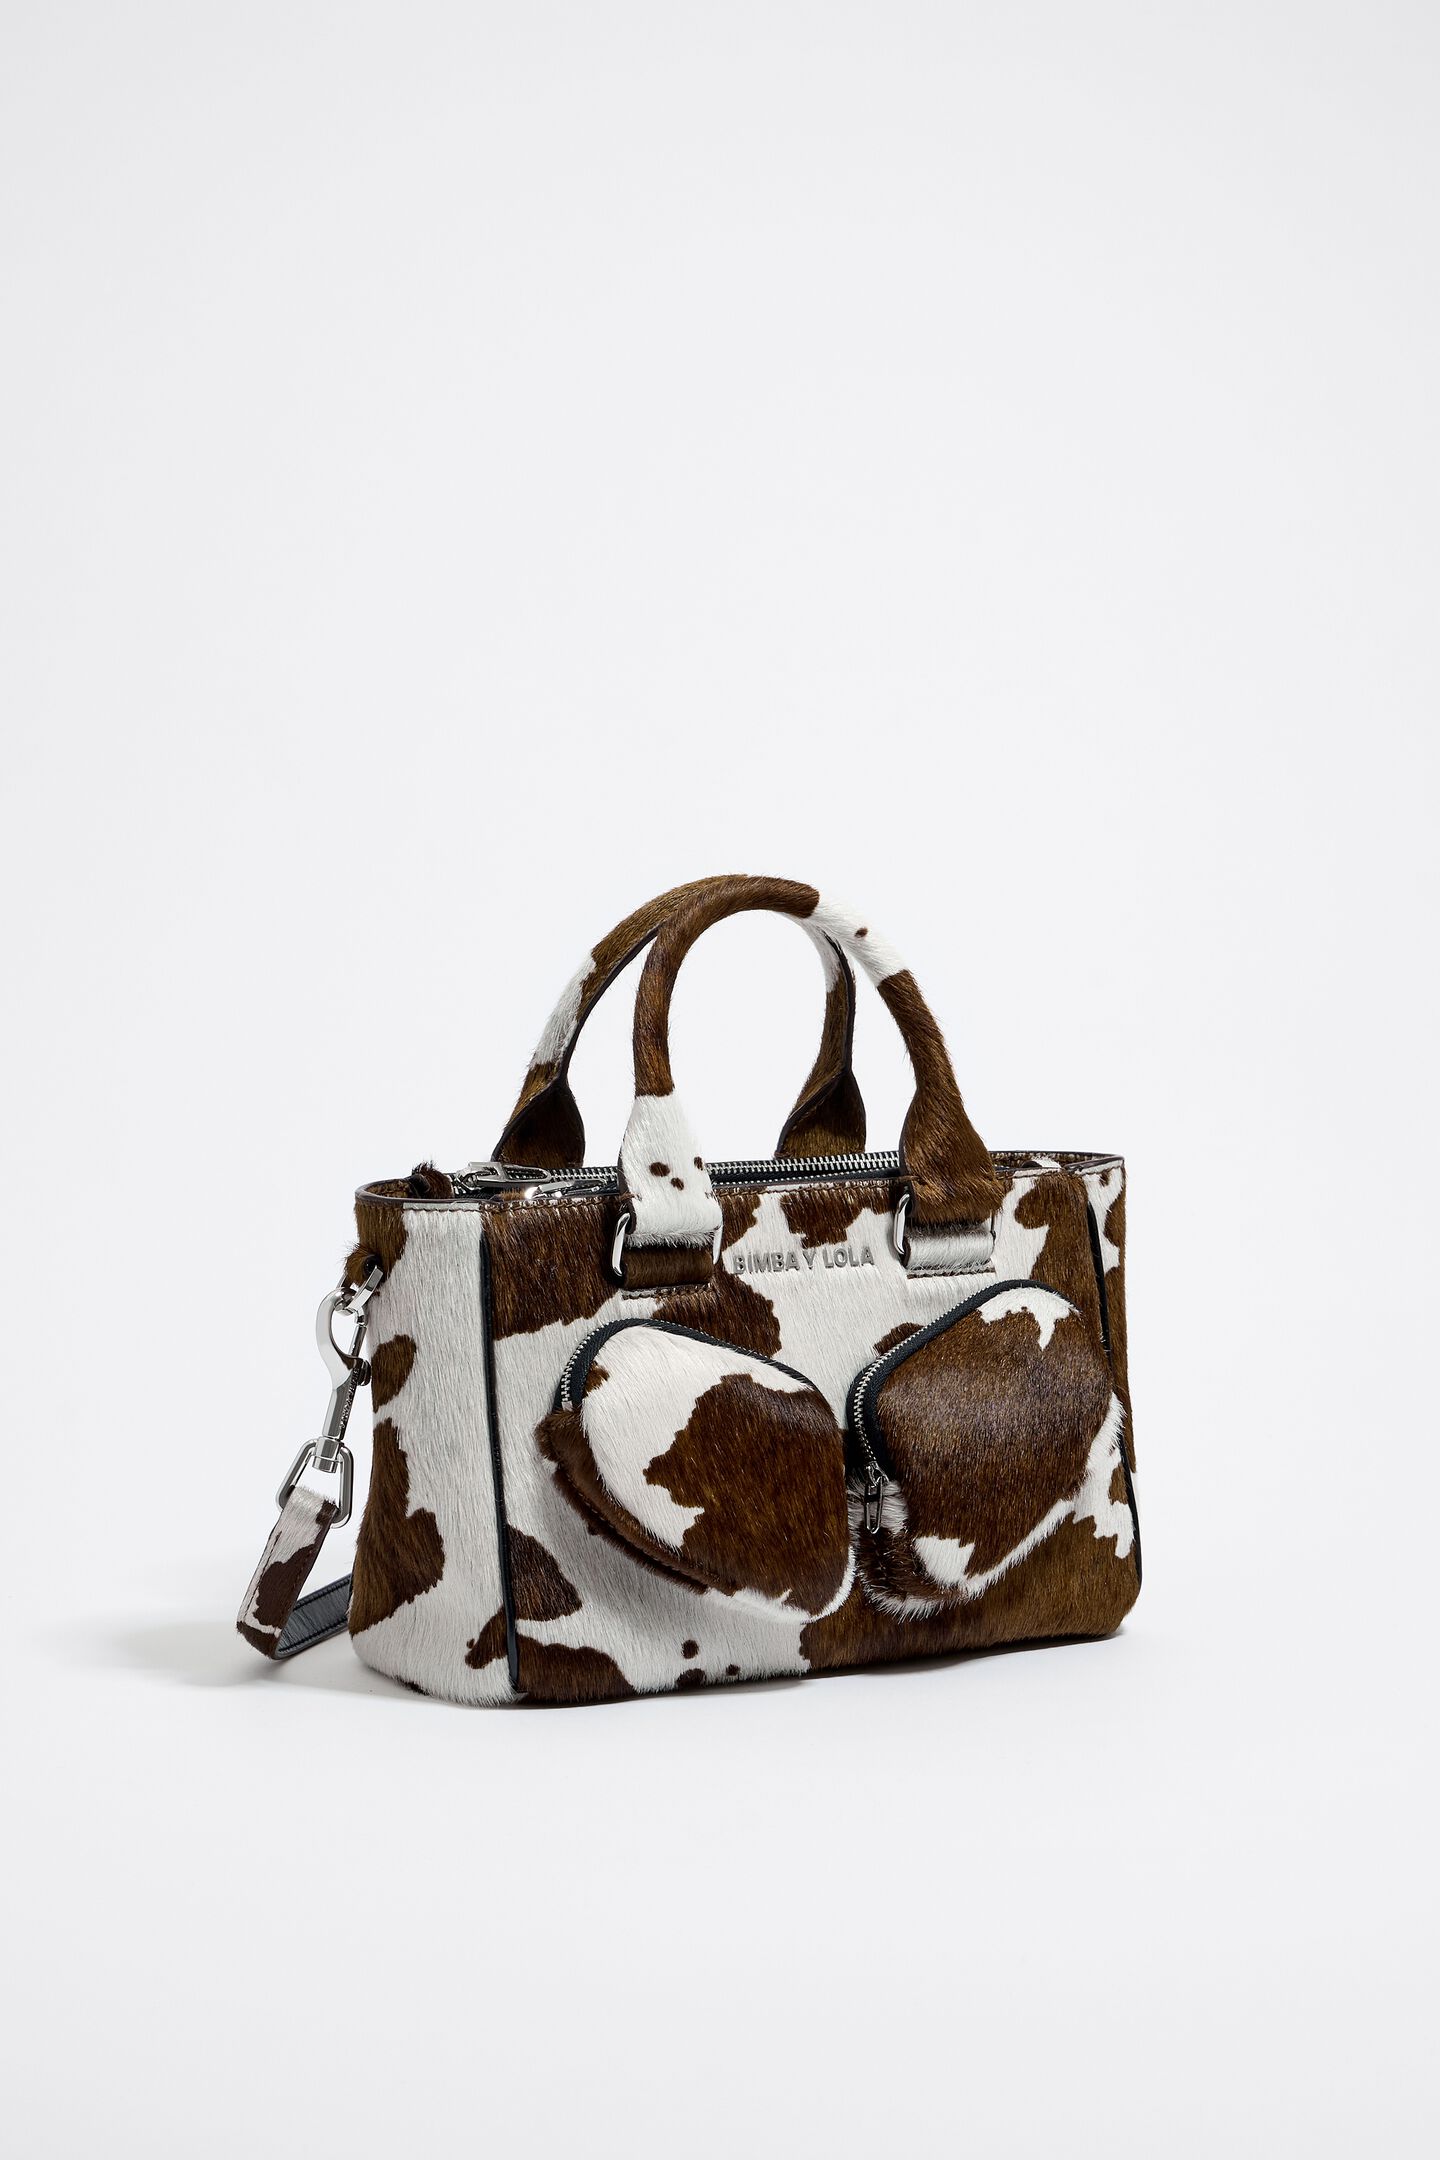 Louis Vuitton Bag With Pockets Portugal, SAVE 51